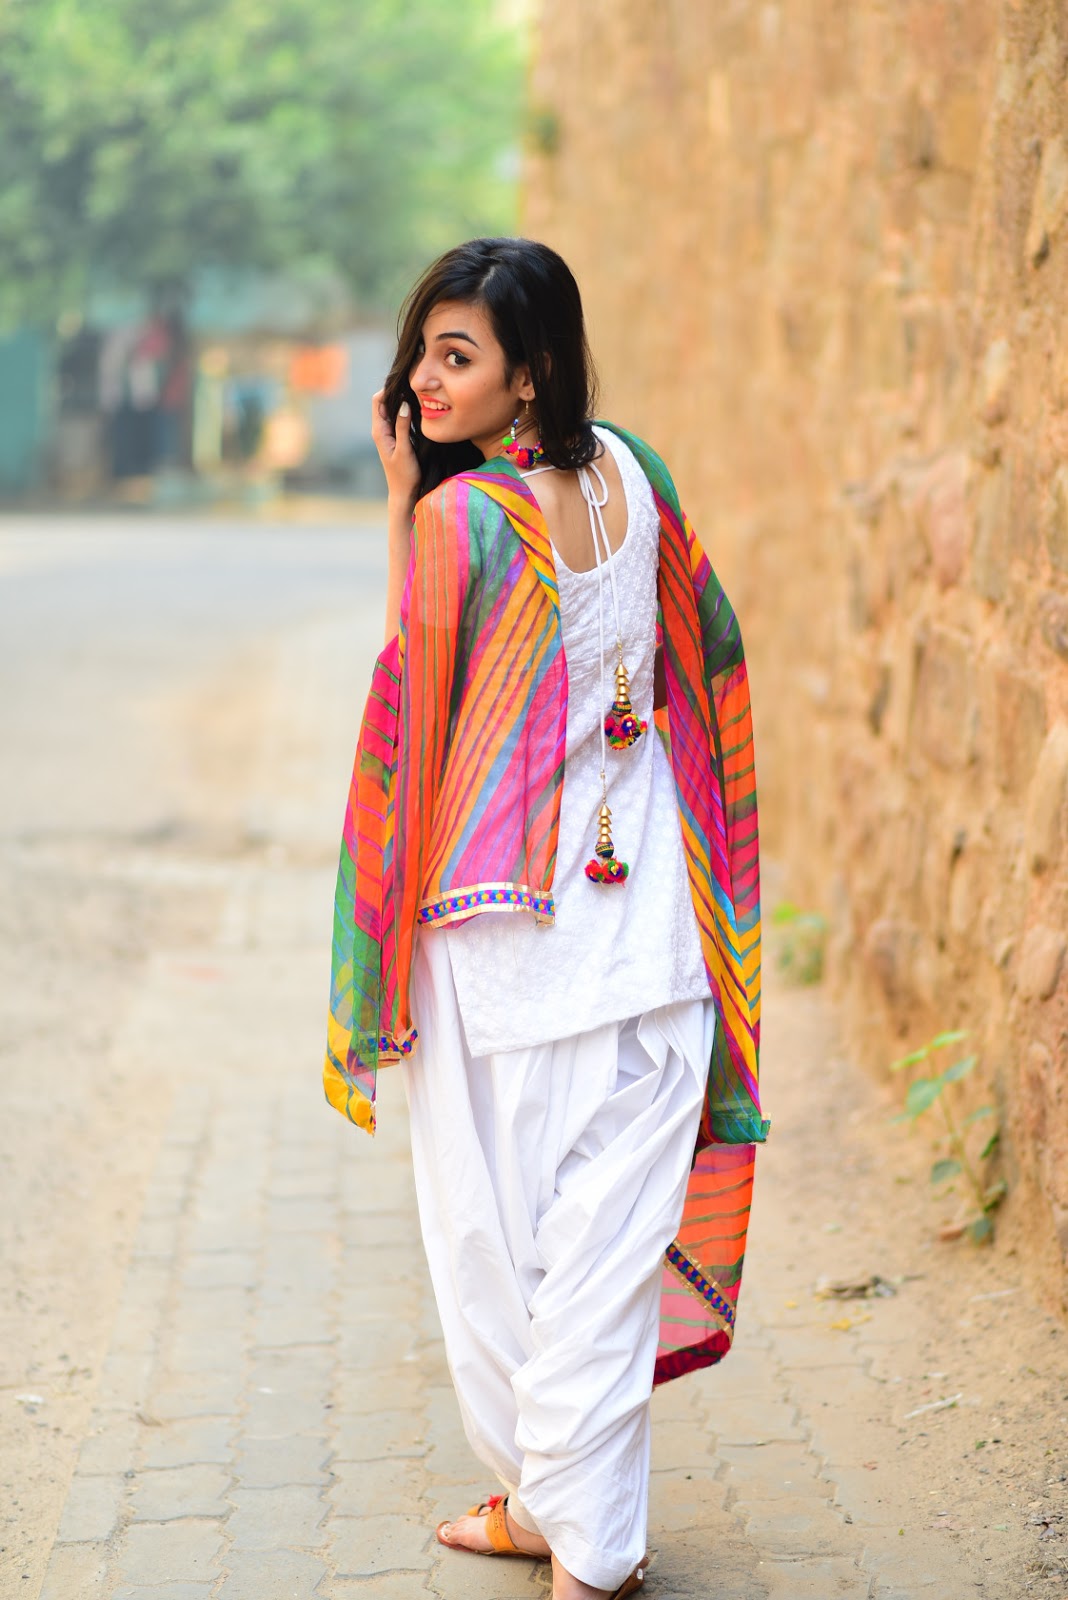 Most Beautiful Punjabi Girls In Salwar Kameez Suit - White Suit With Colourful Dupatta , HD Wallpaper & Backgrounds